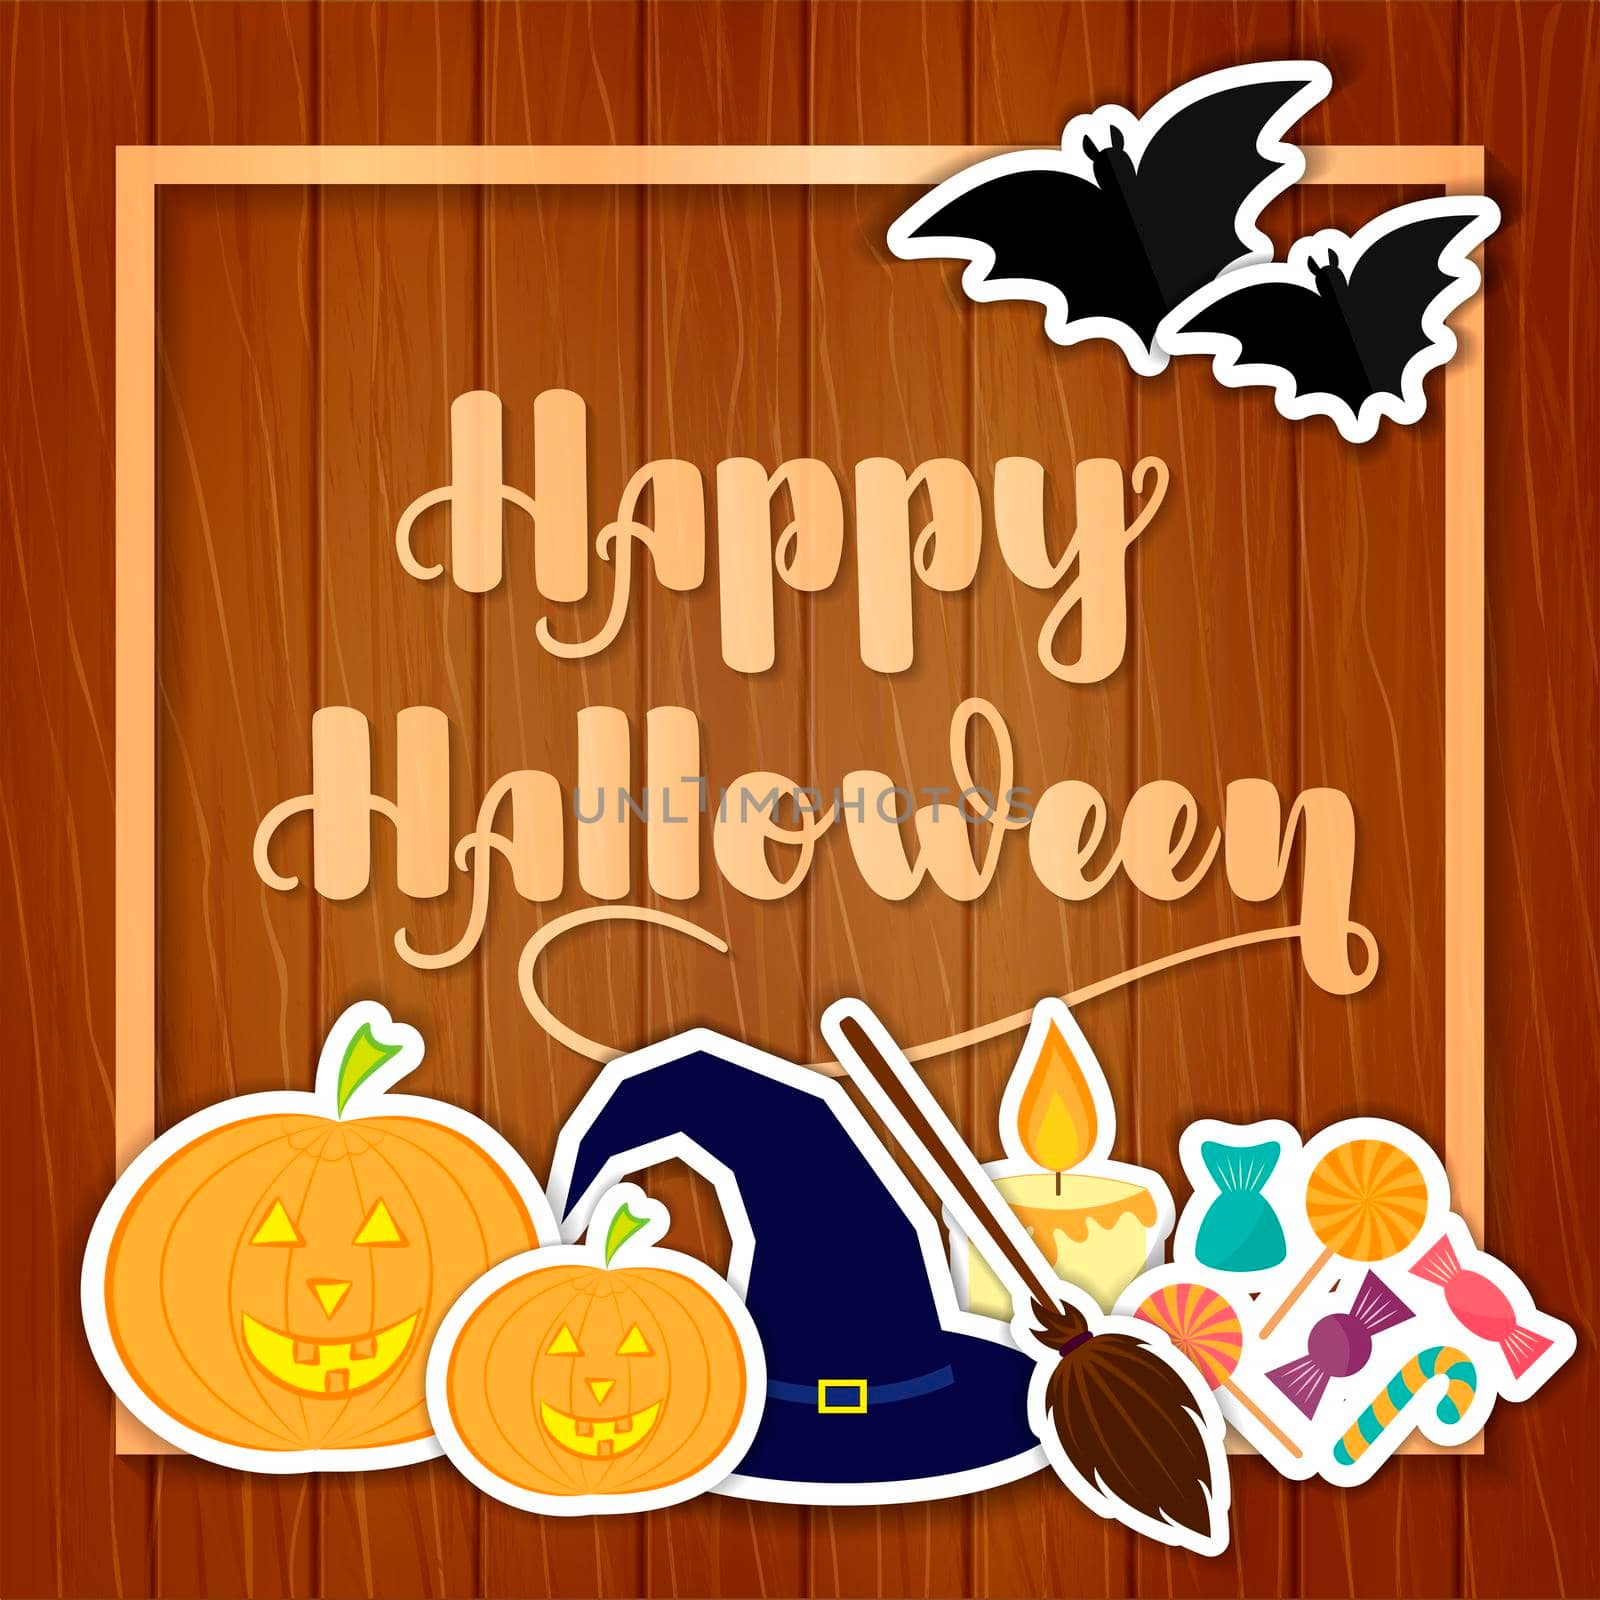 Happy Halloween. illustration with hand written lettering, pumpkins, hat, broom, candle, candies and bats. Template for greeting cards, invitations, posters and other items.